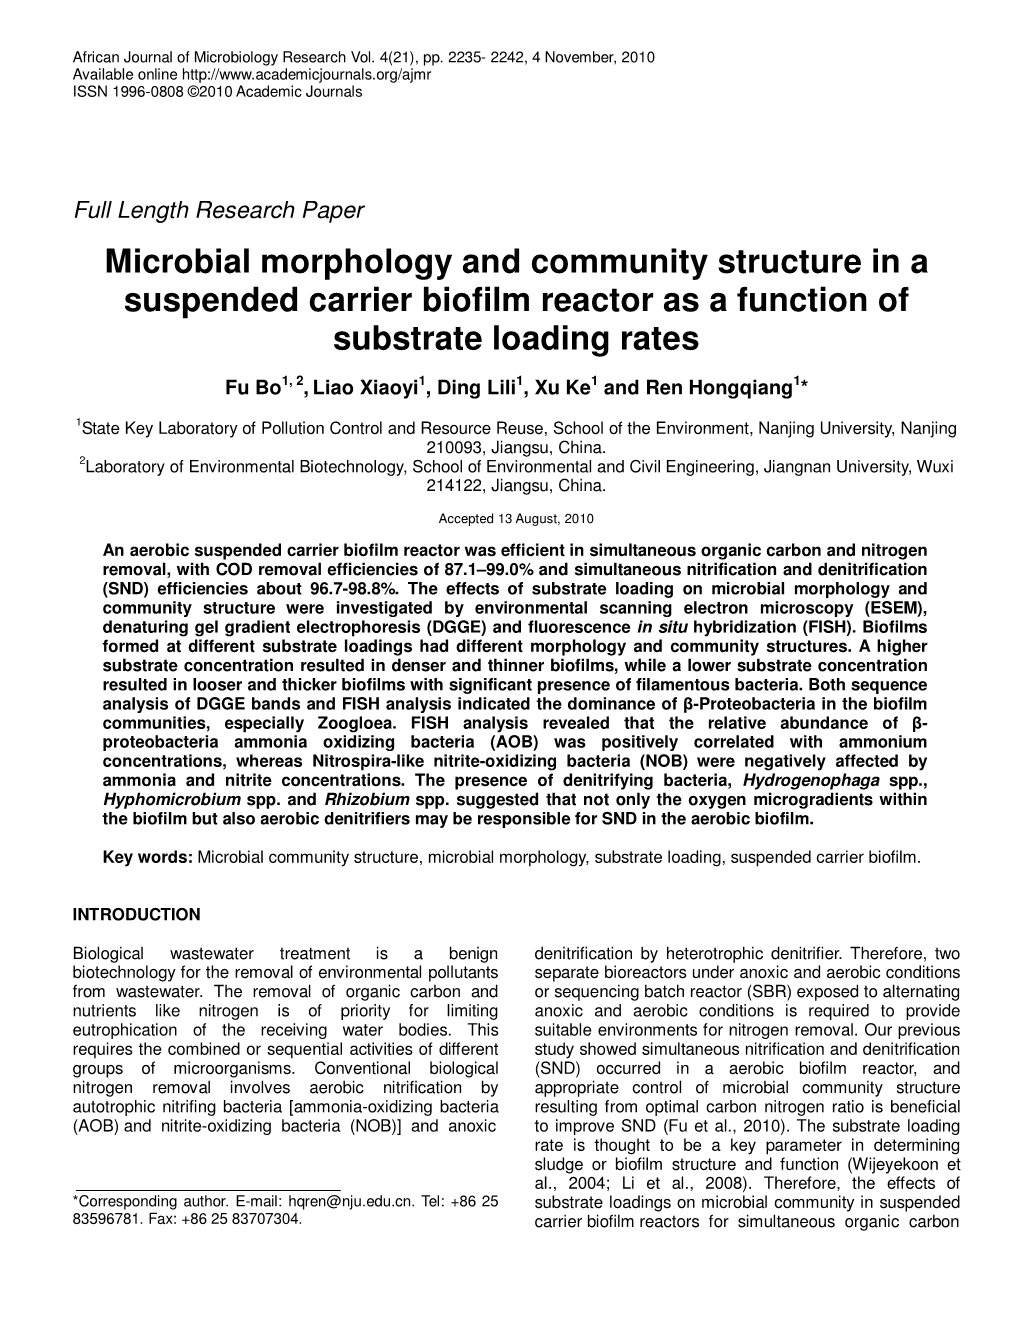 Microbial Morphology and Community Structure in a Suspended Carrier Biofilm Reactor As a Function of Substrate Loading Rates